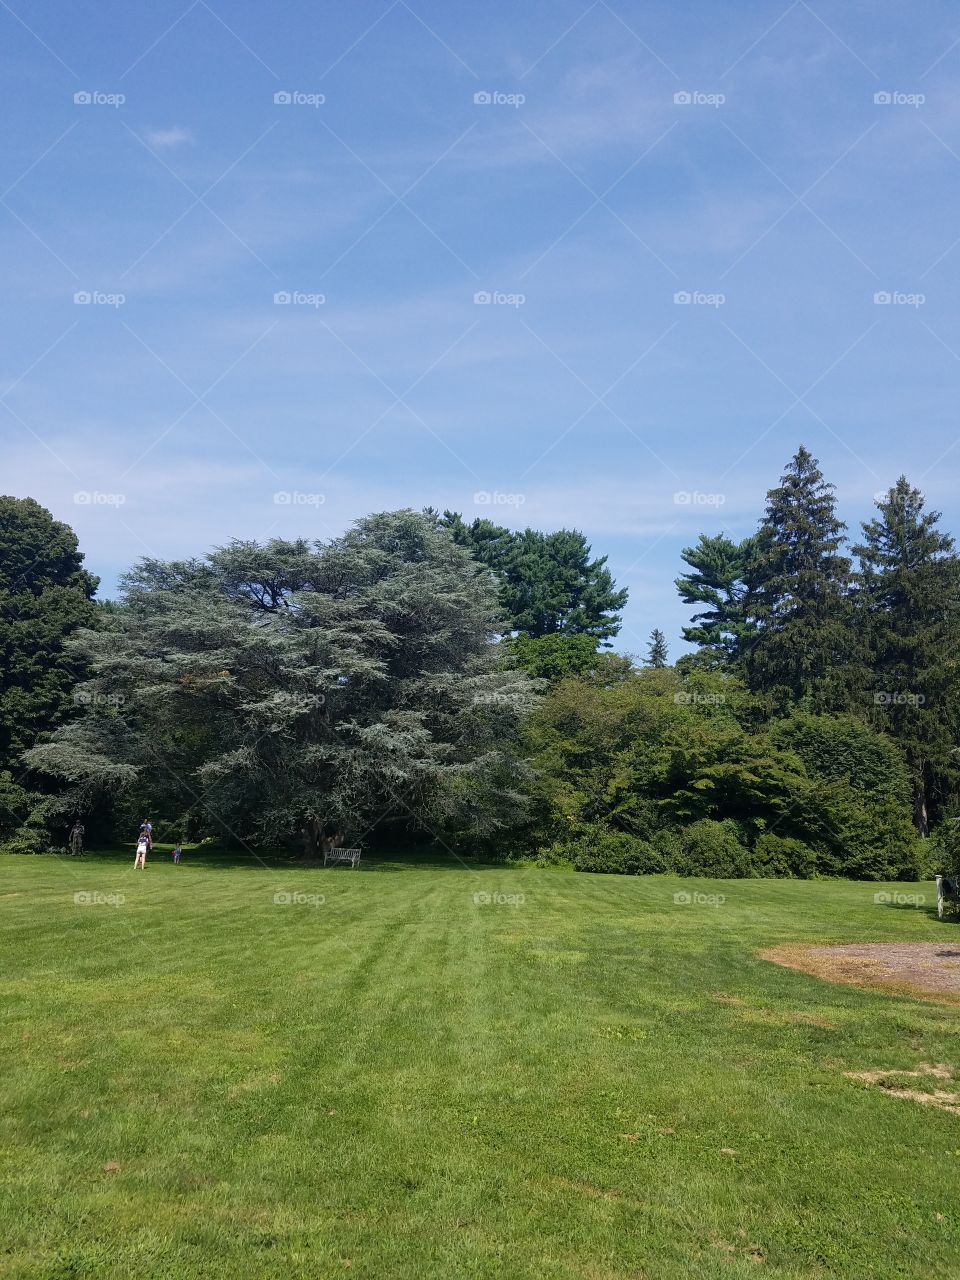 Planting Fields Arboretum State Park, Oyster Bay, NY - August 2017 - Taken on Android Phone - Galaxy S7 - Exploring the Grounds on a Lazy Sunday near the end of Summer